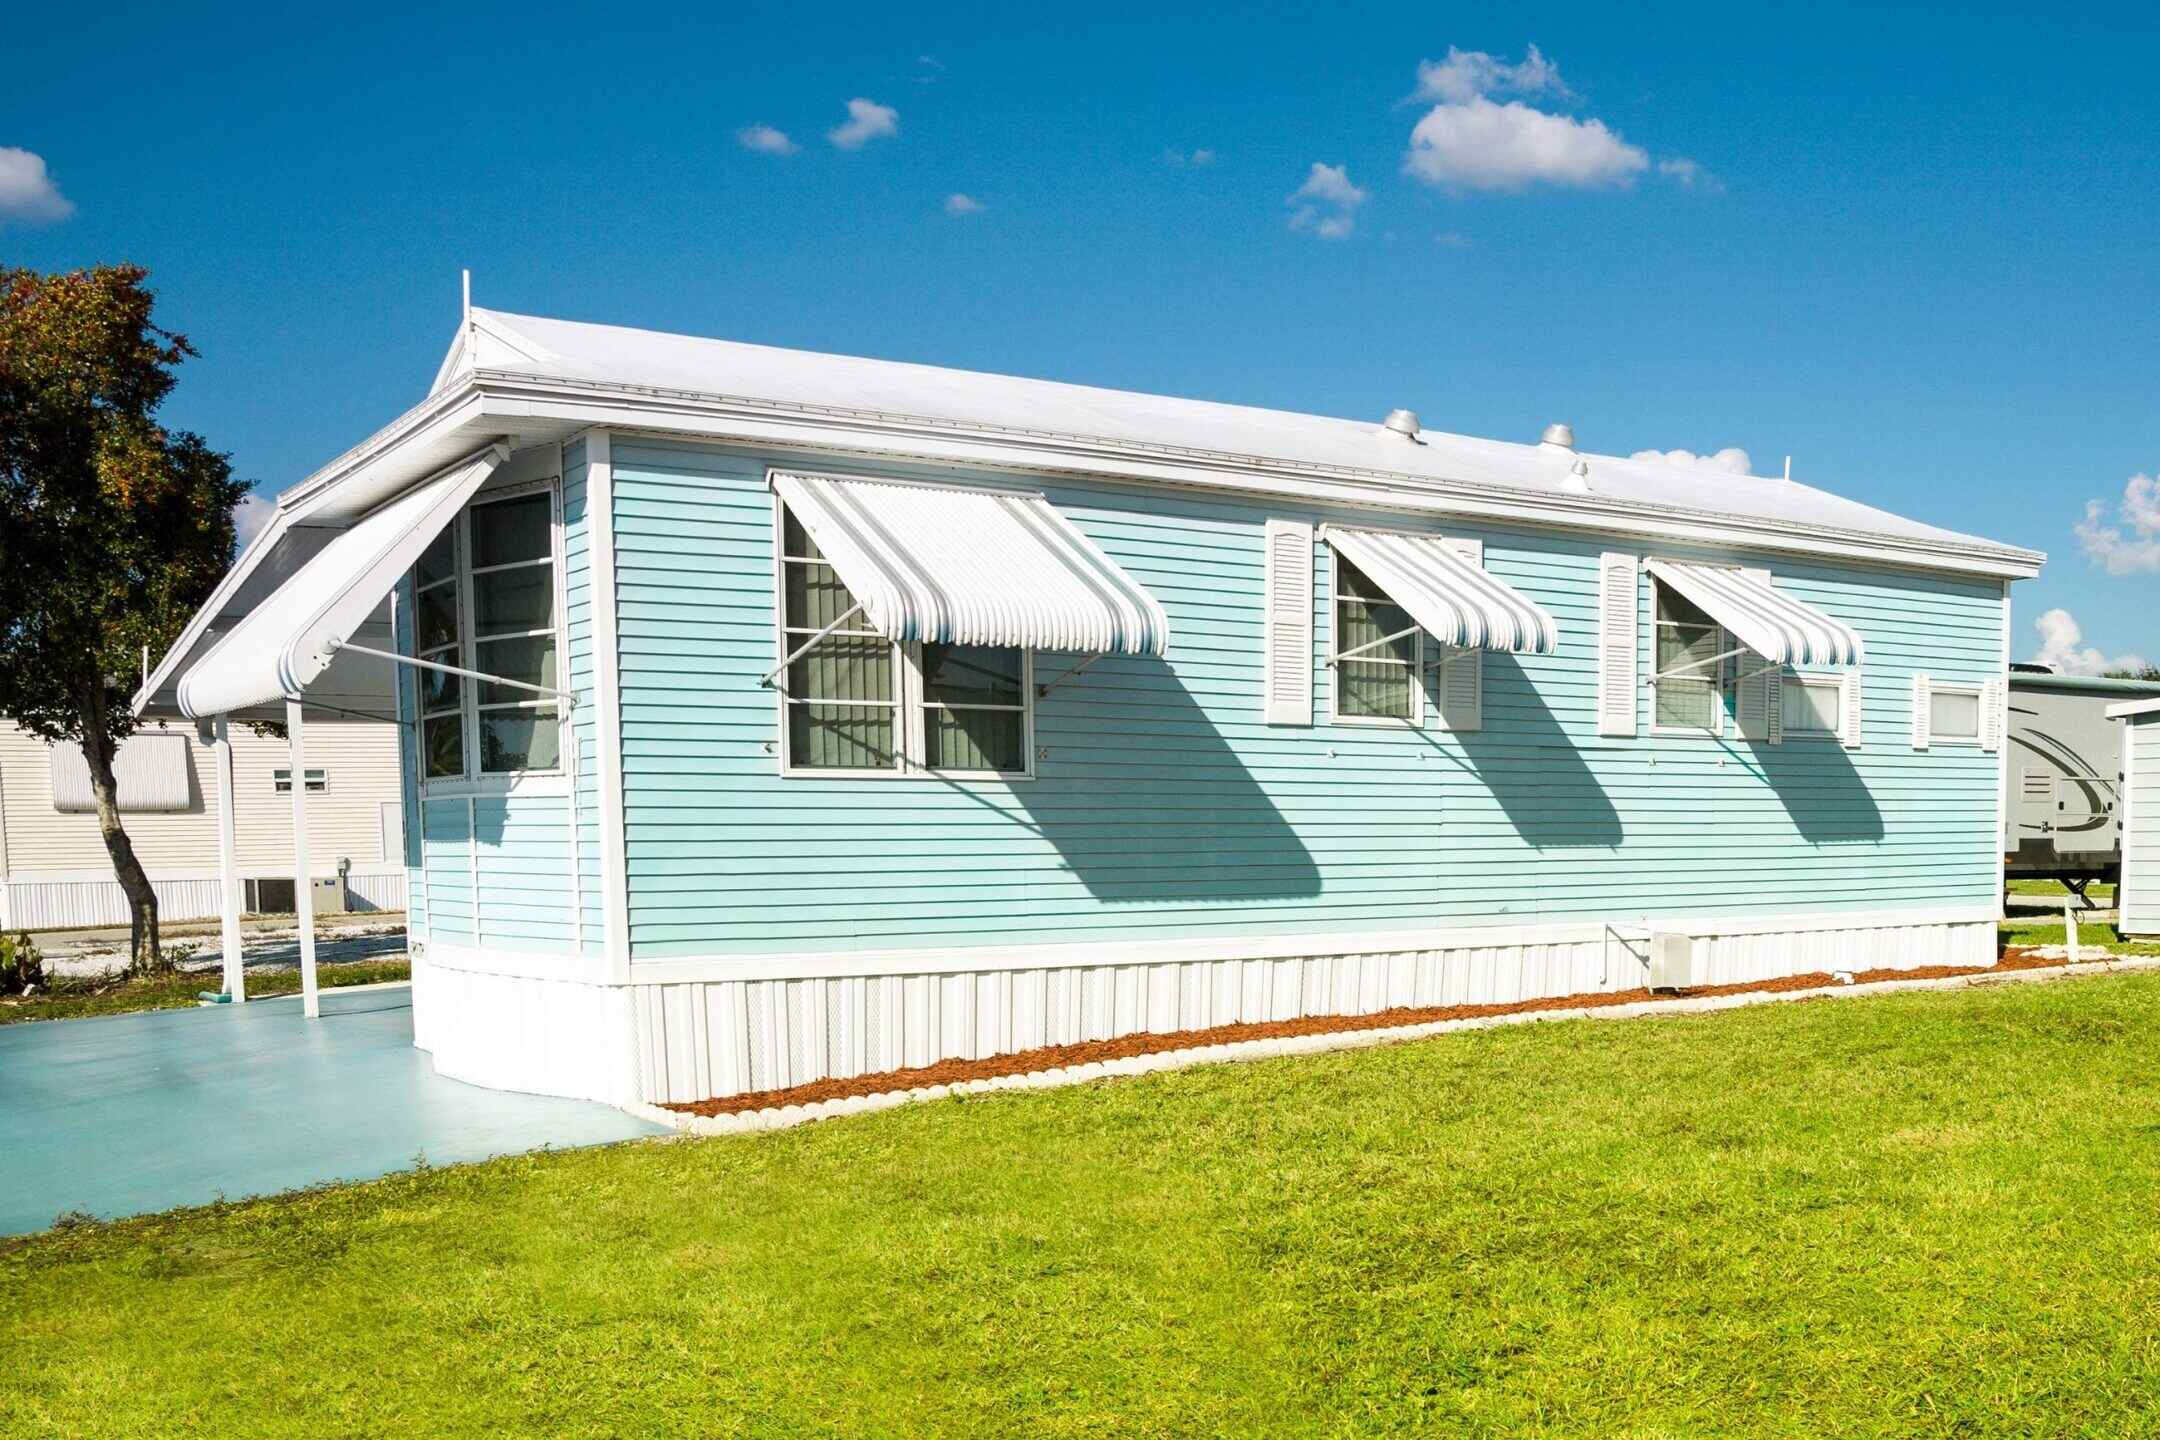 What Is Considered Permanent Foundation For A Mobile Home